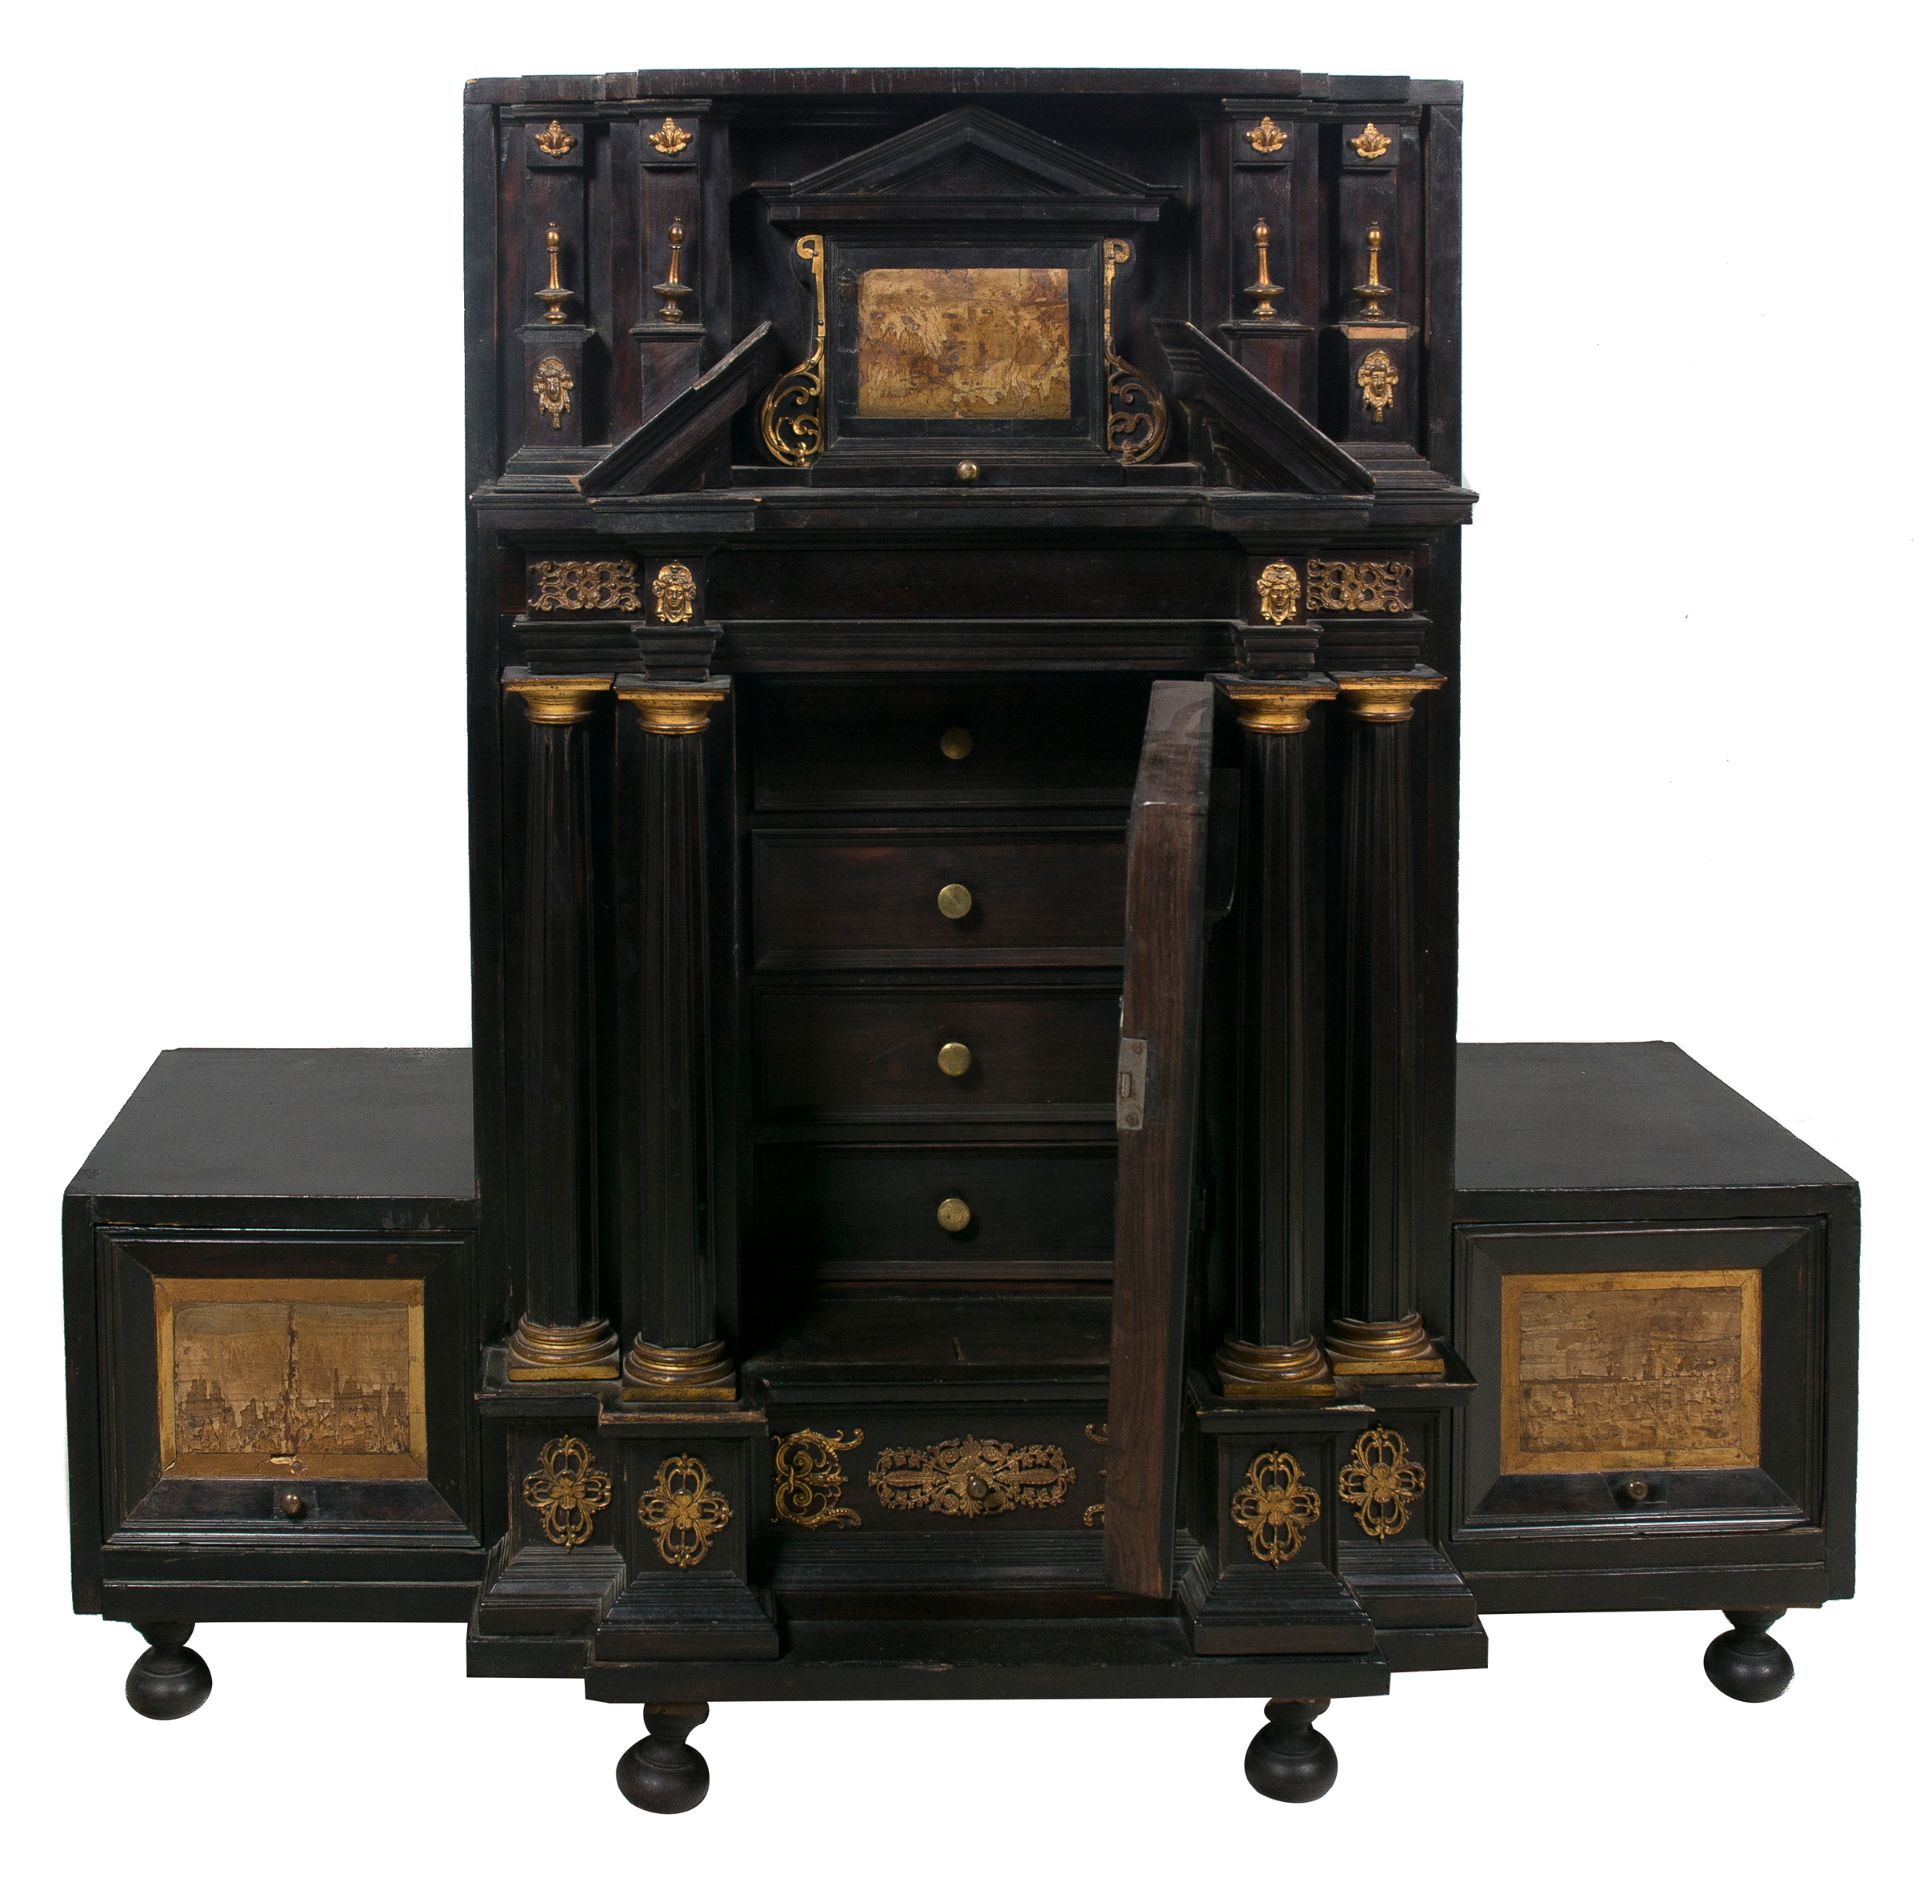 Ebony, gilded bronze and ivory cabinet. Flanders or Italy. 17th century. - Image 2 of 5